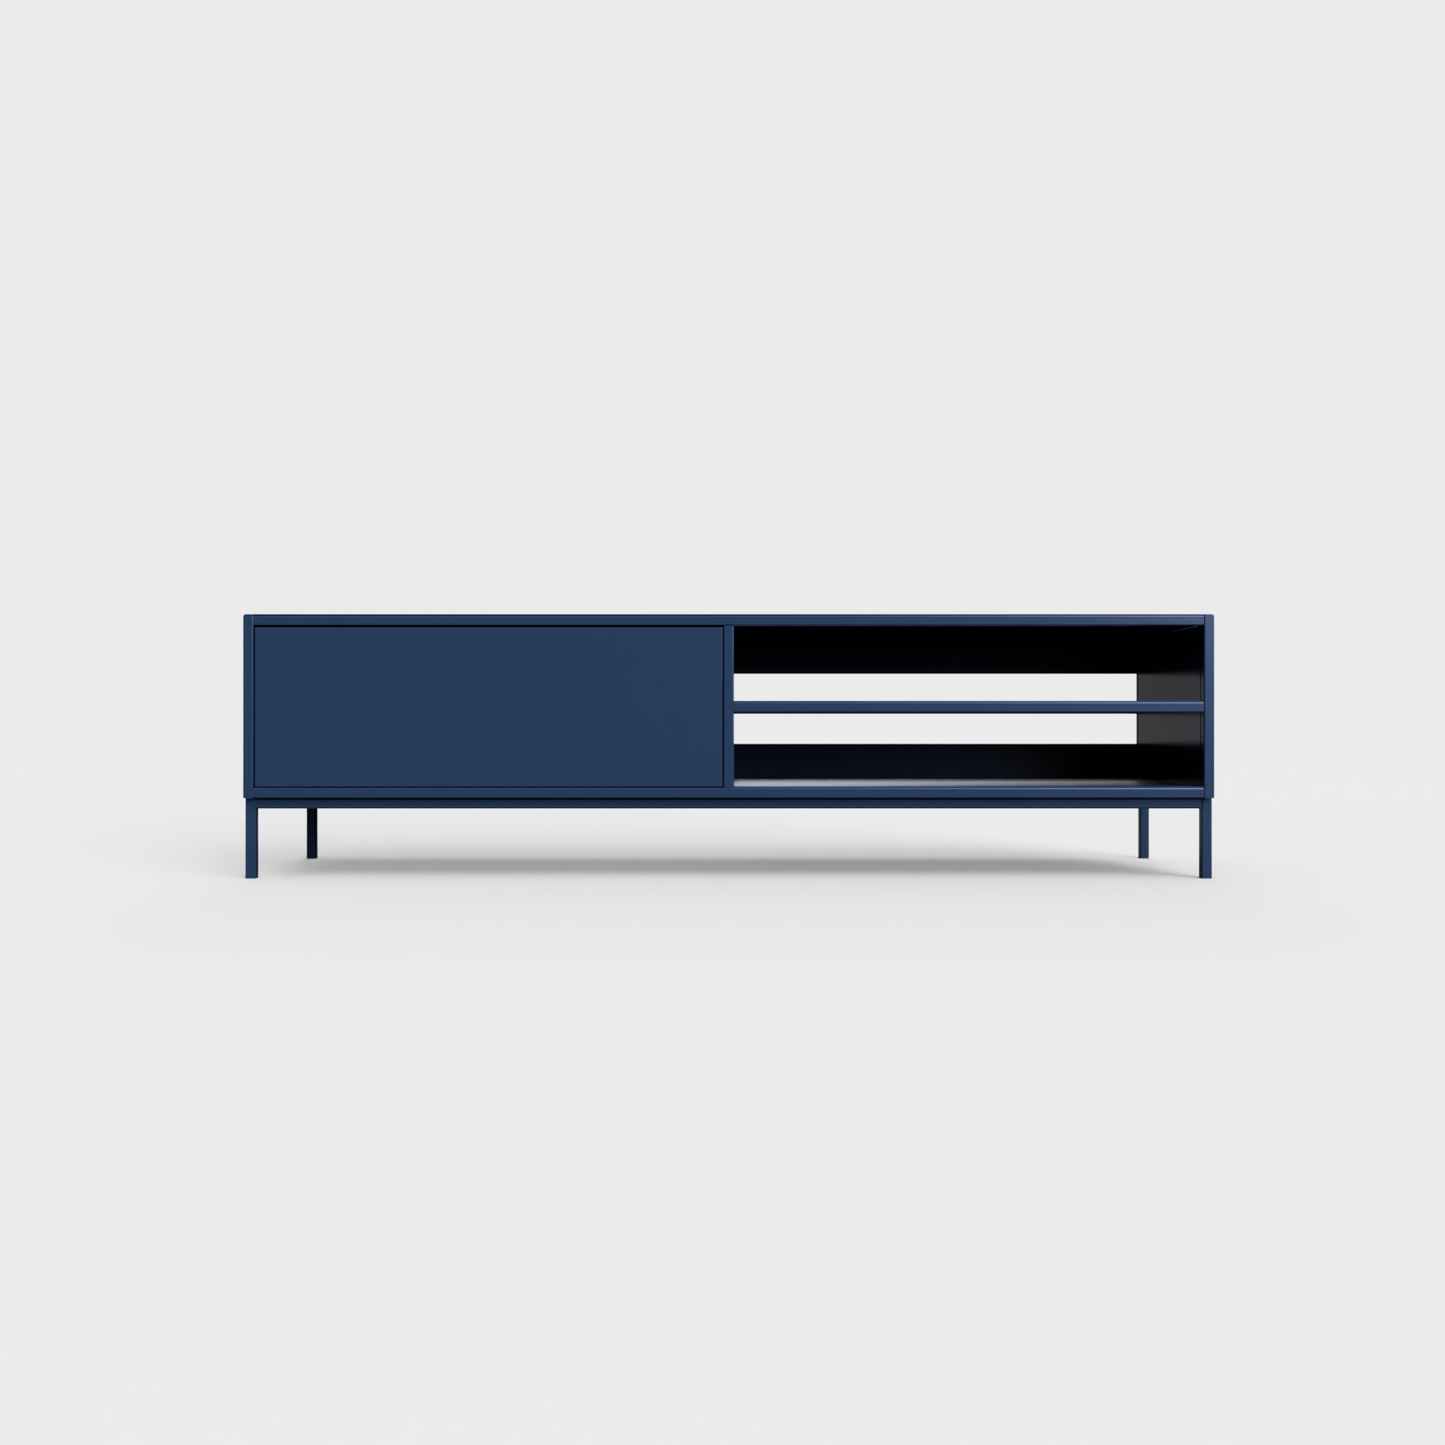 Prunus 02 Lowboard in prussian blue color, powder-coated steel, elegant and modern piece of furniture for your living room